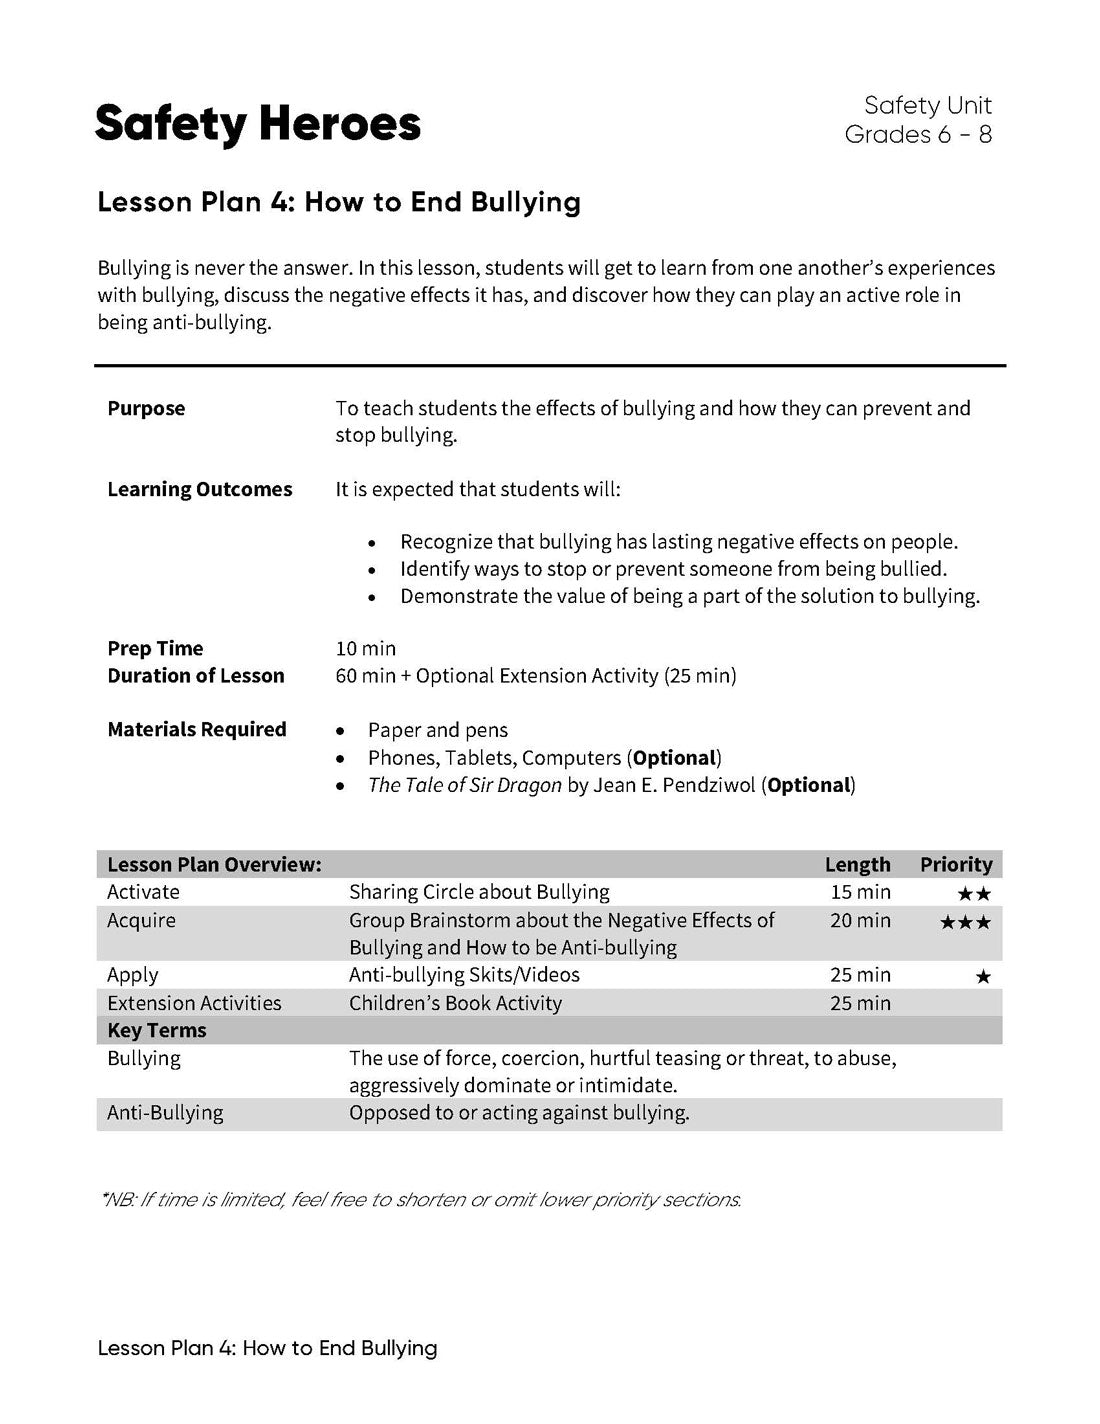 Lesson Plan 4: How to End Bullying